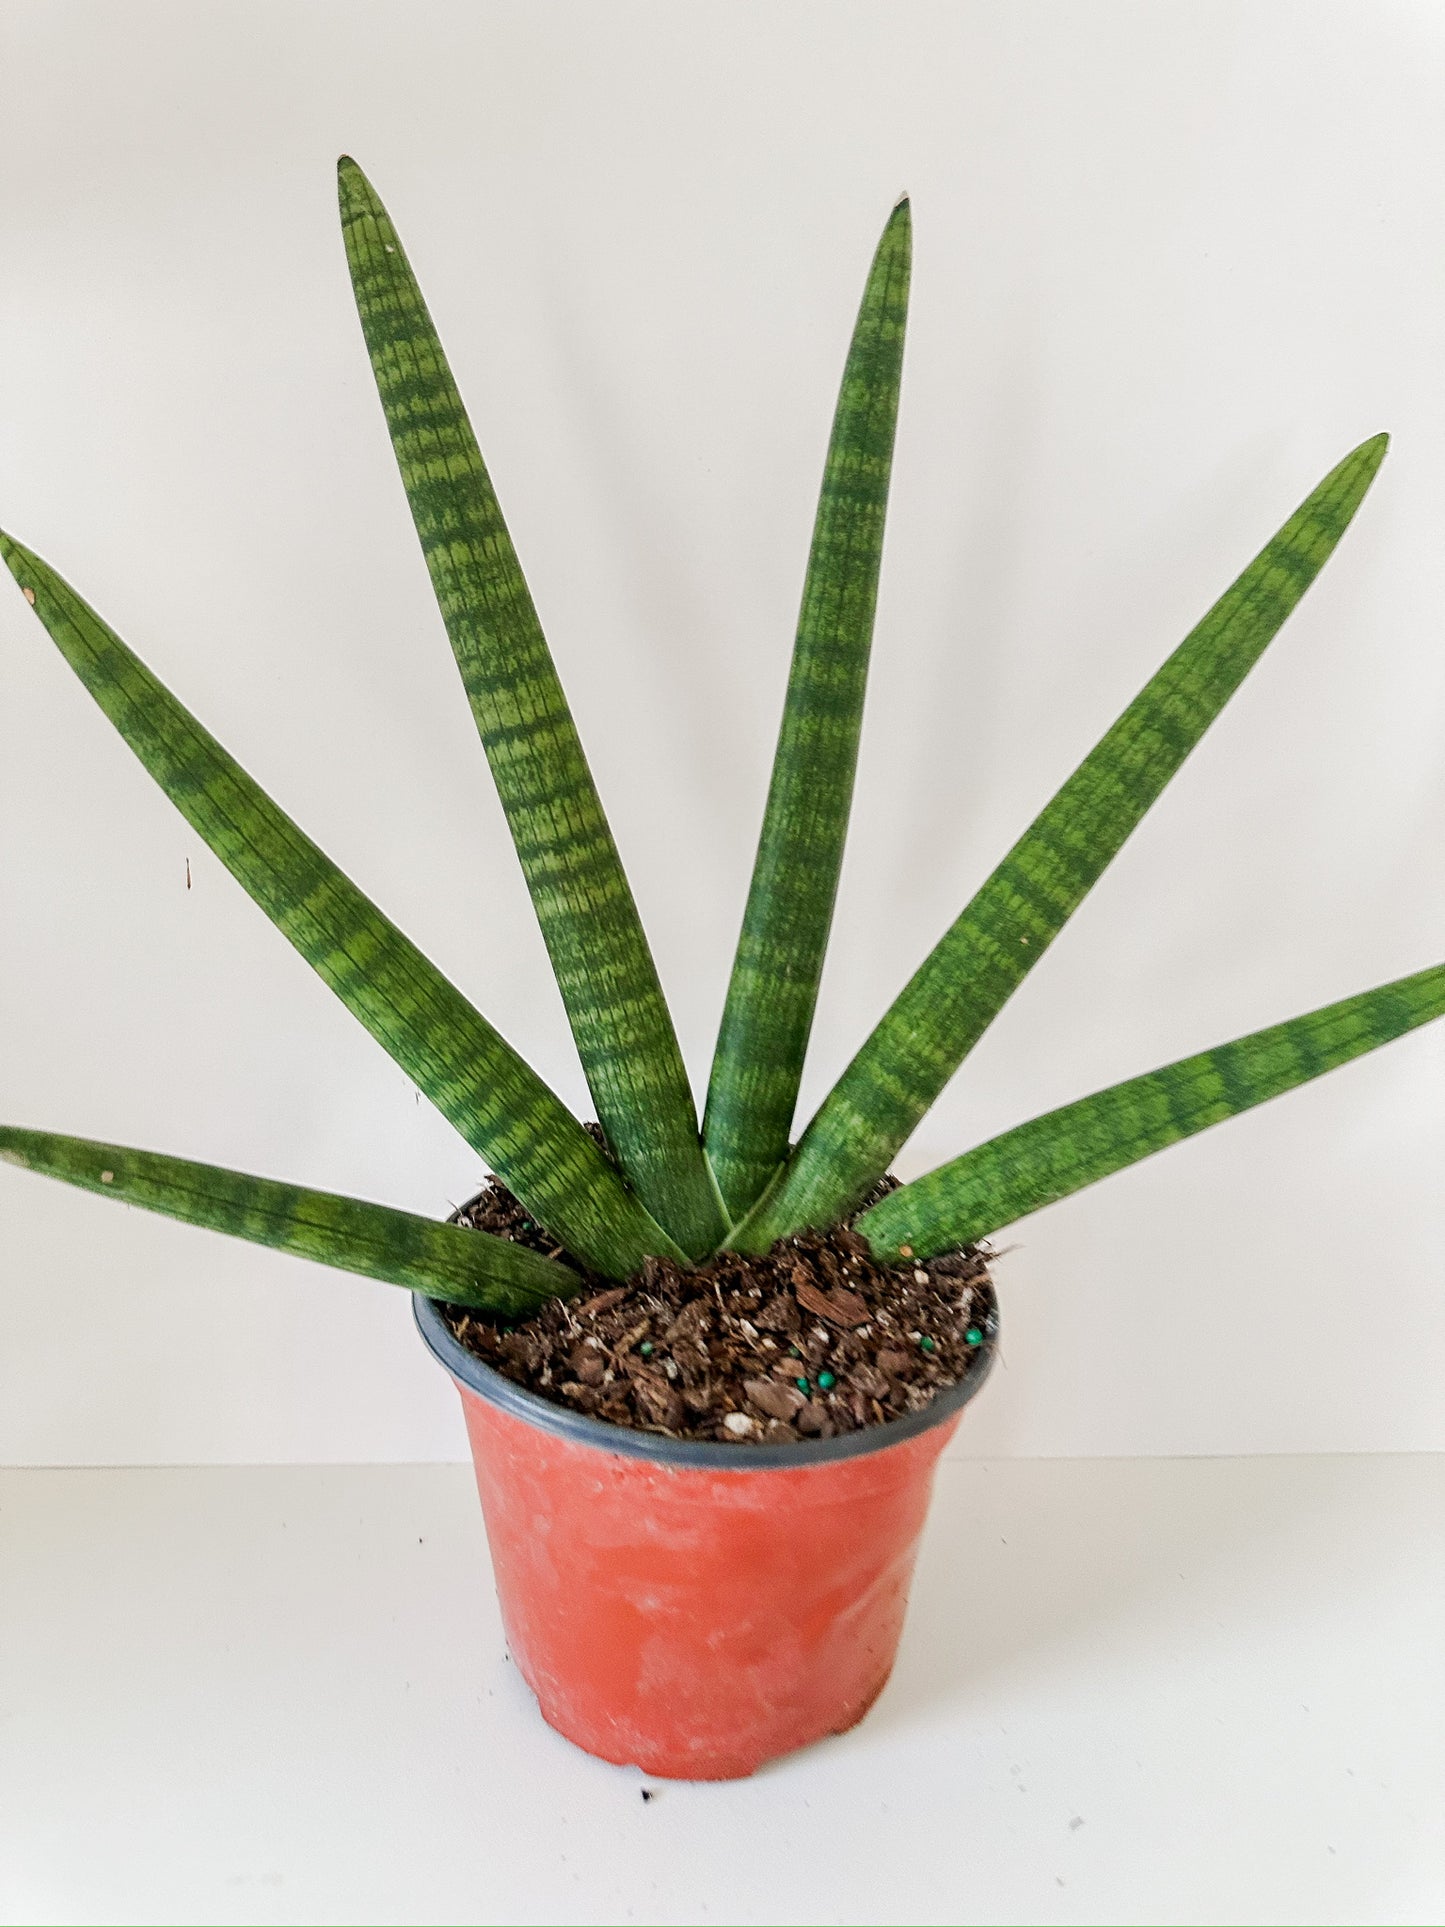 Sansevaria Cylindrica 'Starfish Snake Plant'- 🌱 Beginner-Friendly, 🍃Air Purifying, Low Light & Maintenance- Tropical Houseplant- (4 Inch or 6 Inch Nursery Pot)